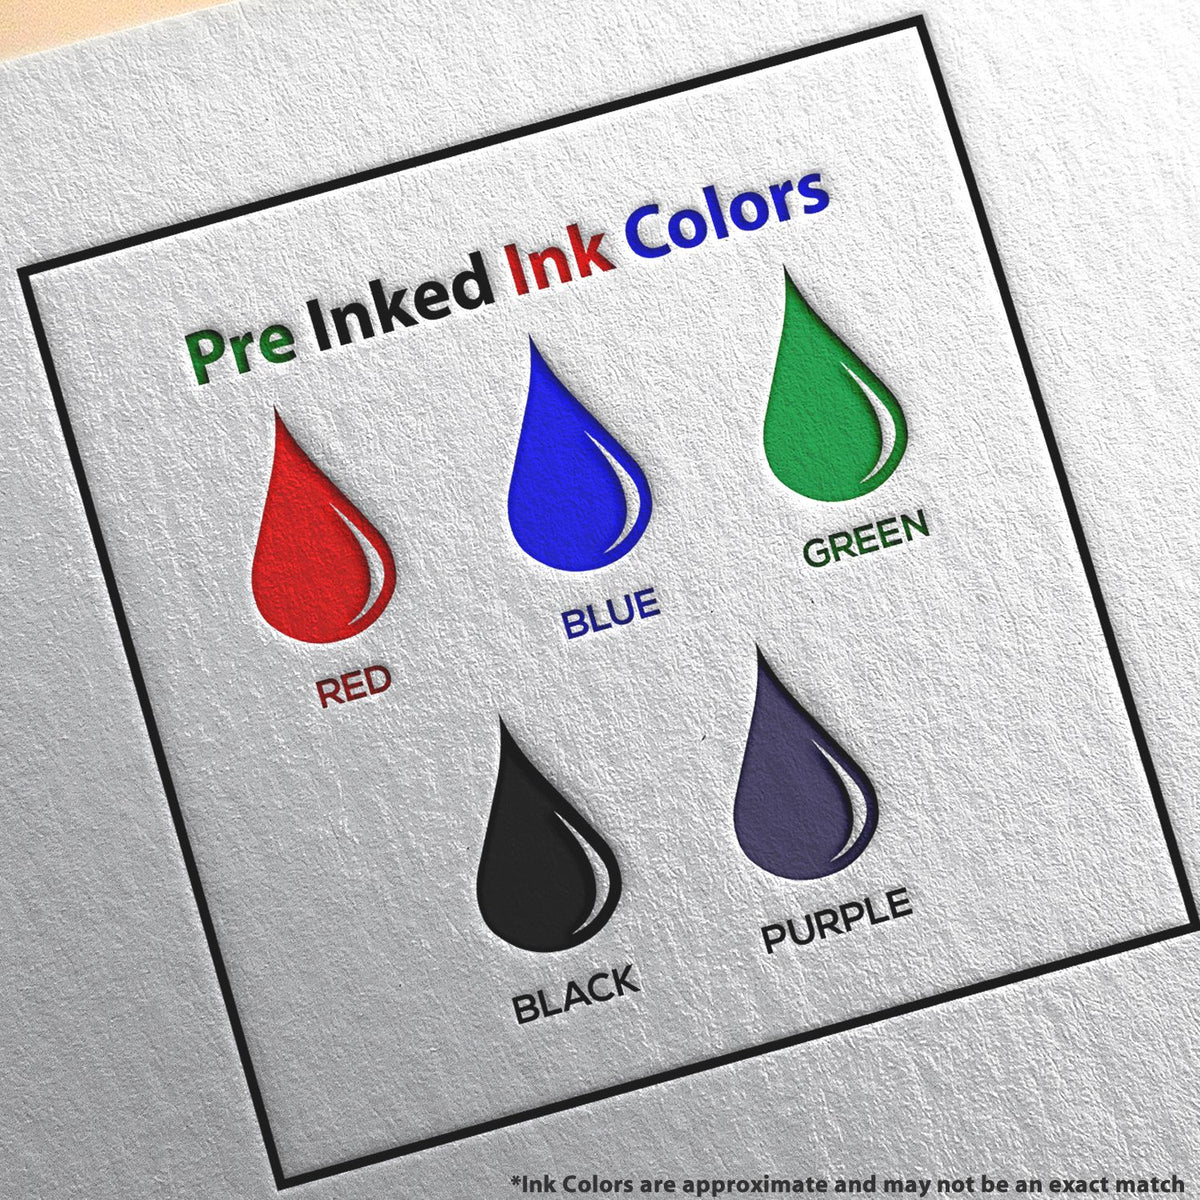 A picture showing the different ink colors or hues available for the Premium MaxLight Pre-Inked Florida Engineering Stamp product.